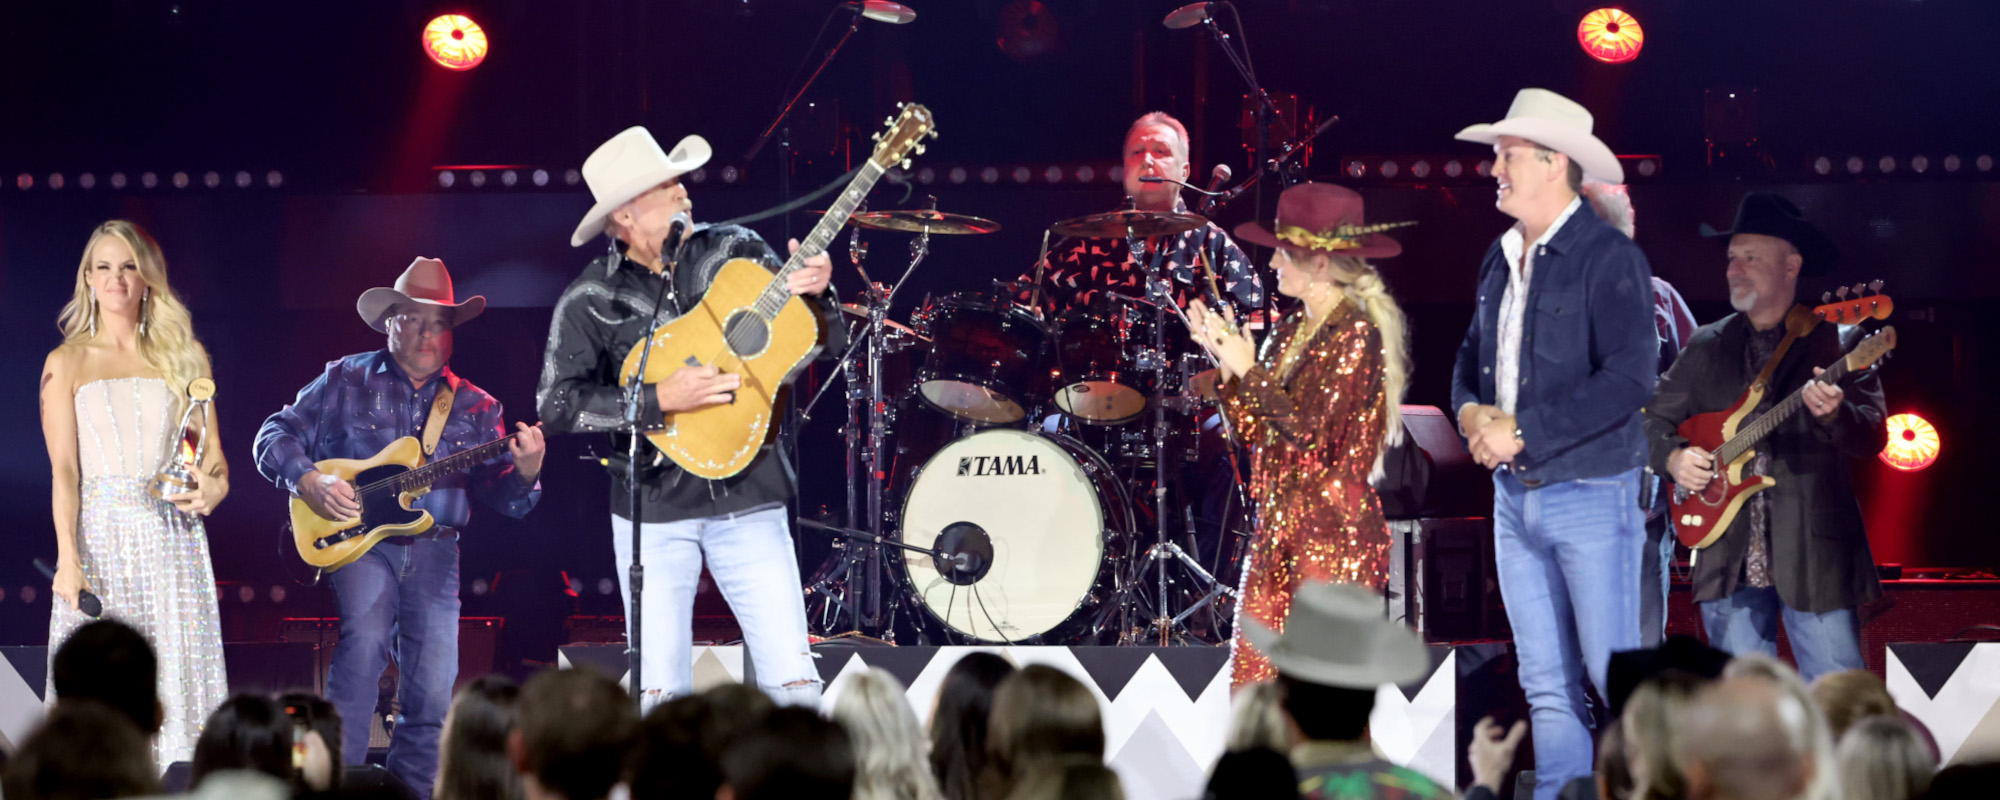 Carrie Underwood, Dierks Bentley and More Pay Tribute to Alan Jackson